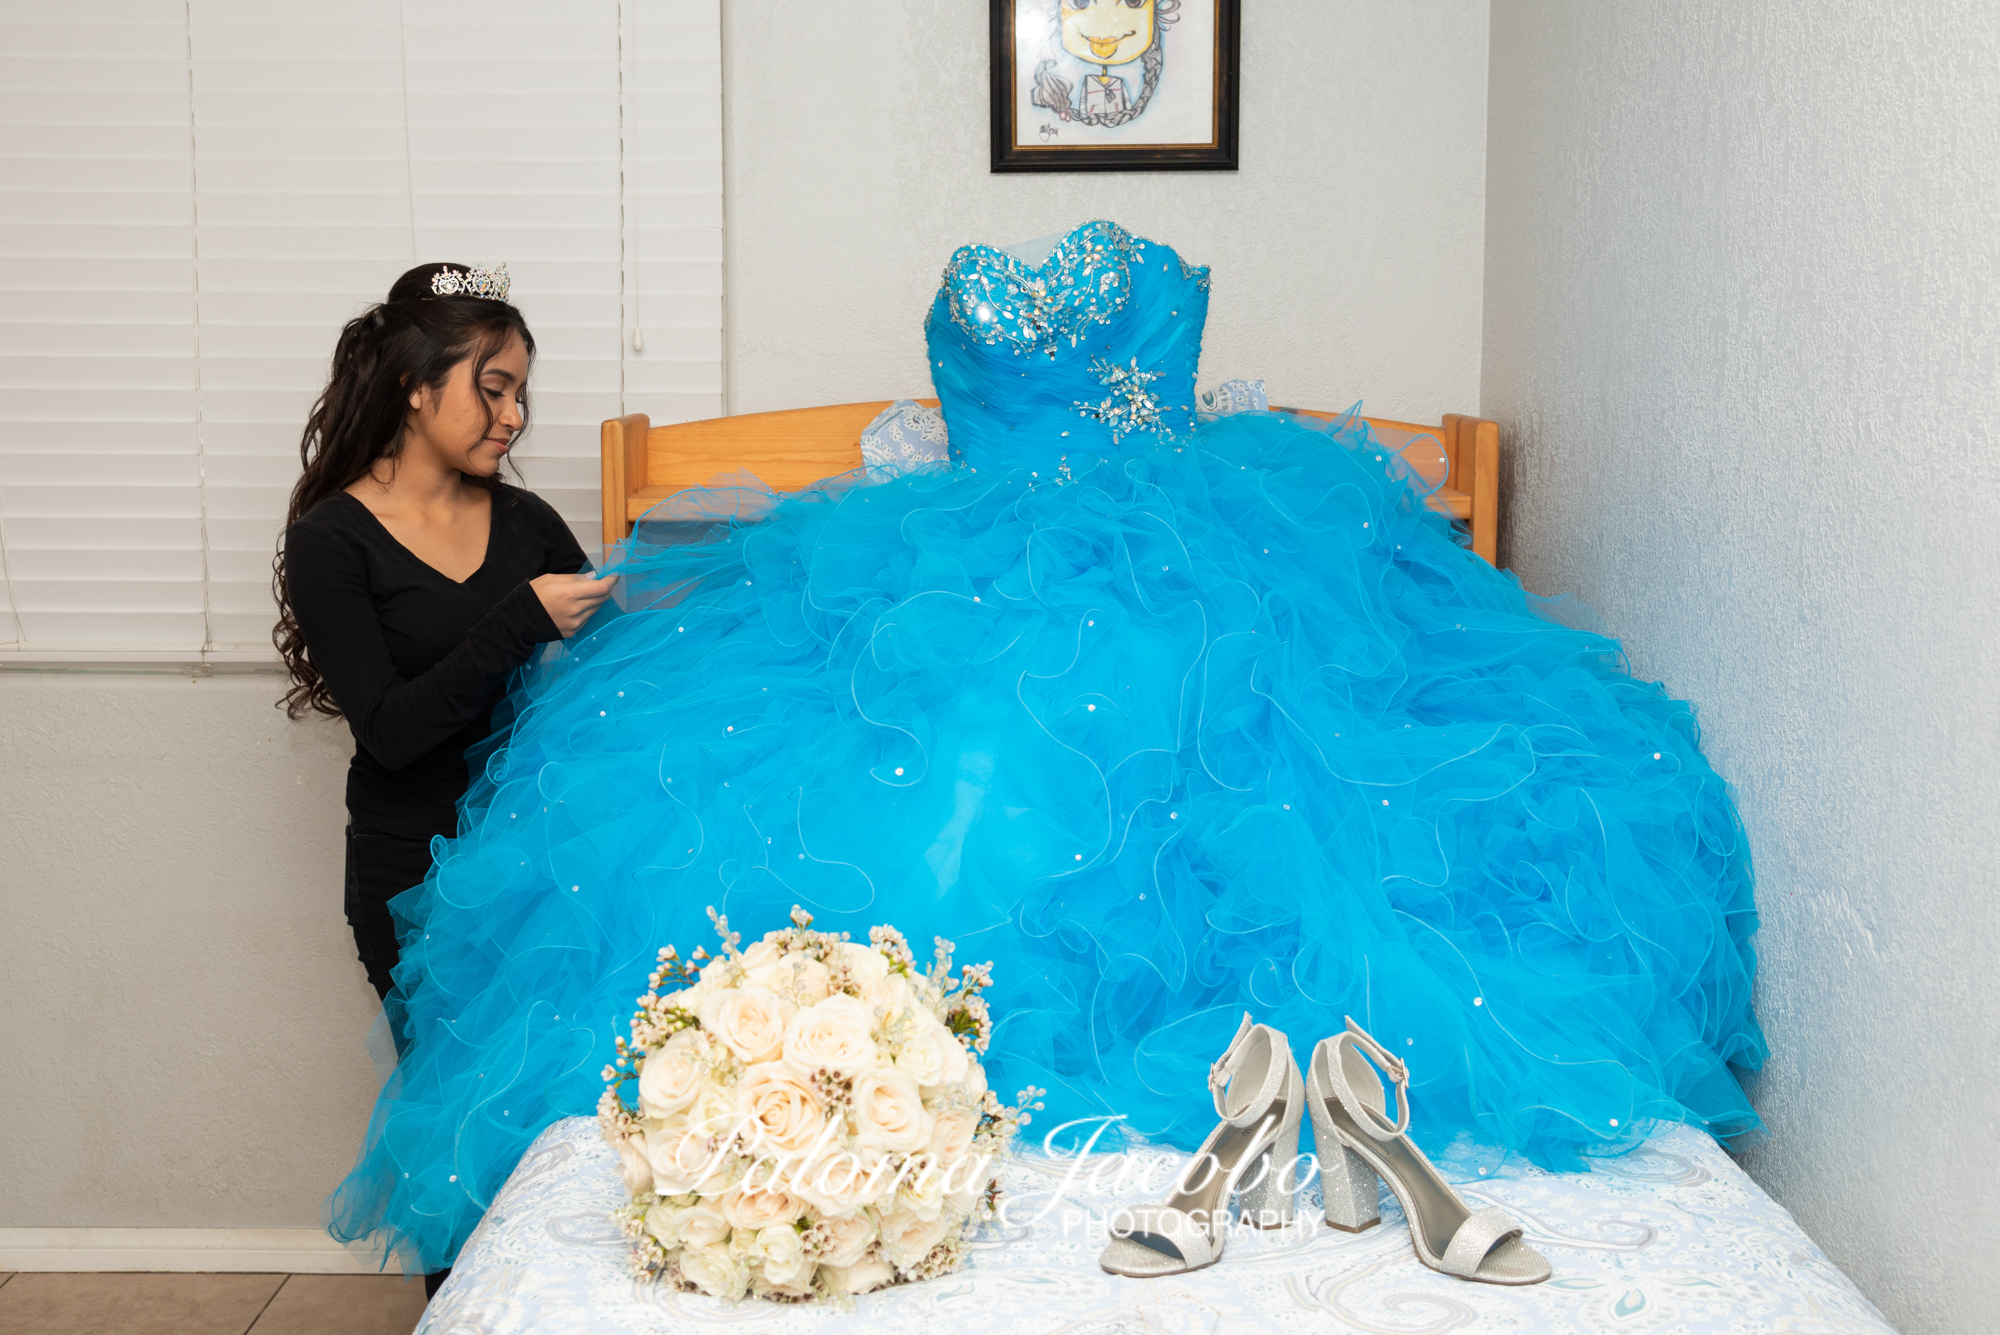 Quinceanera getting ready by Paloma Jacobo Photography